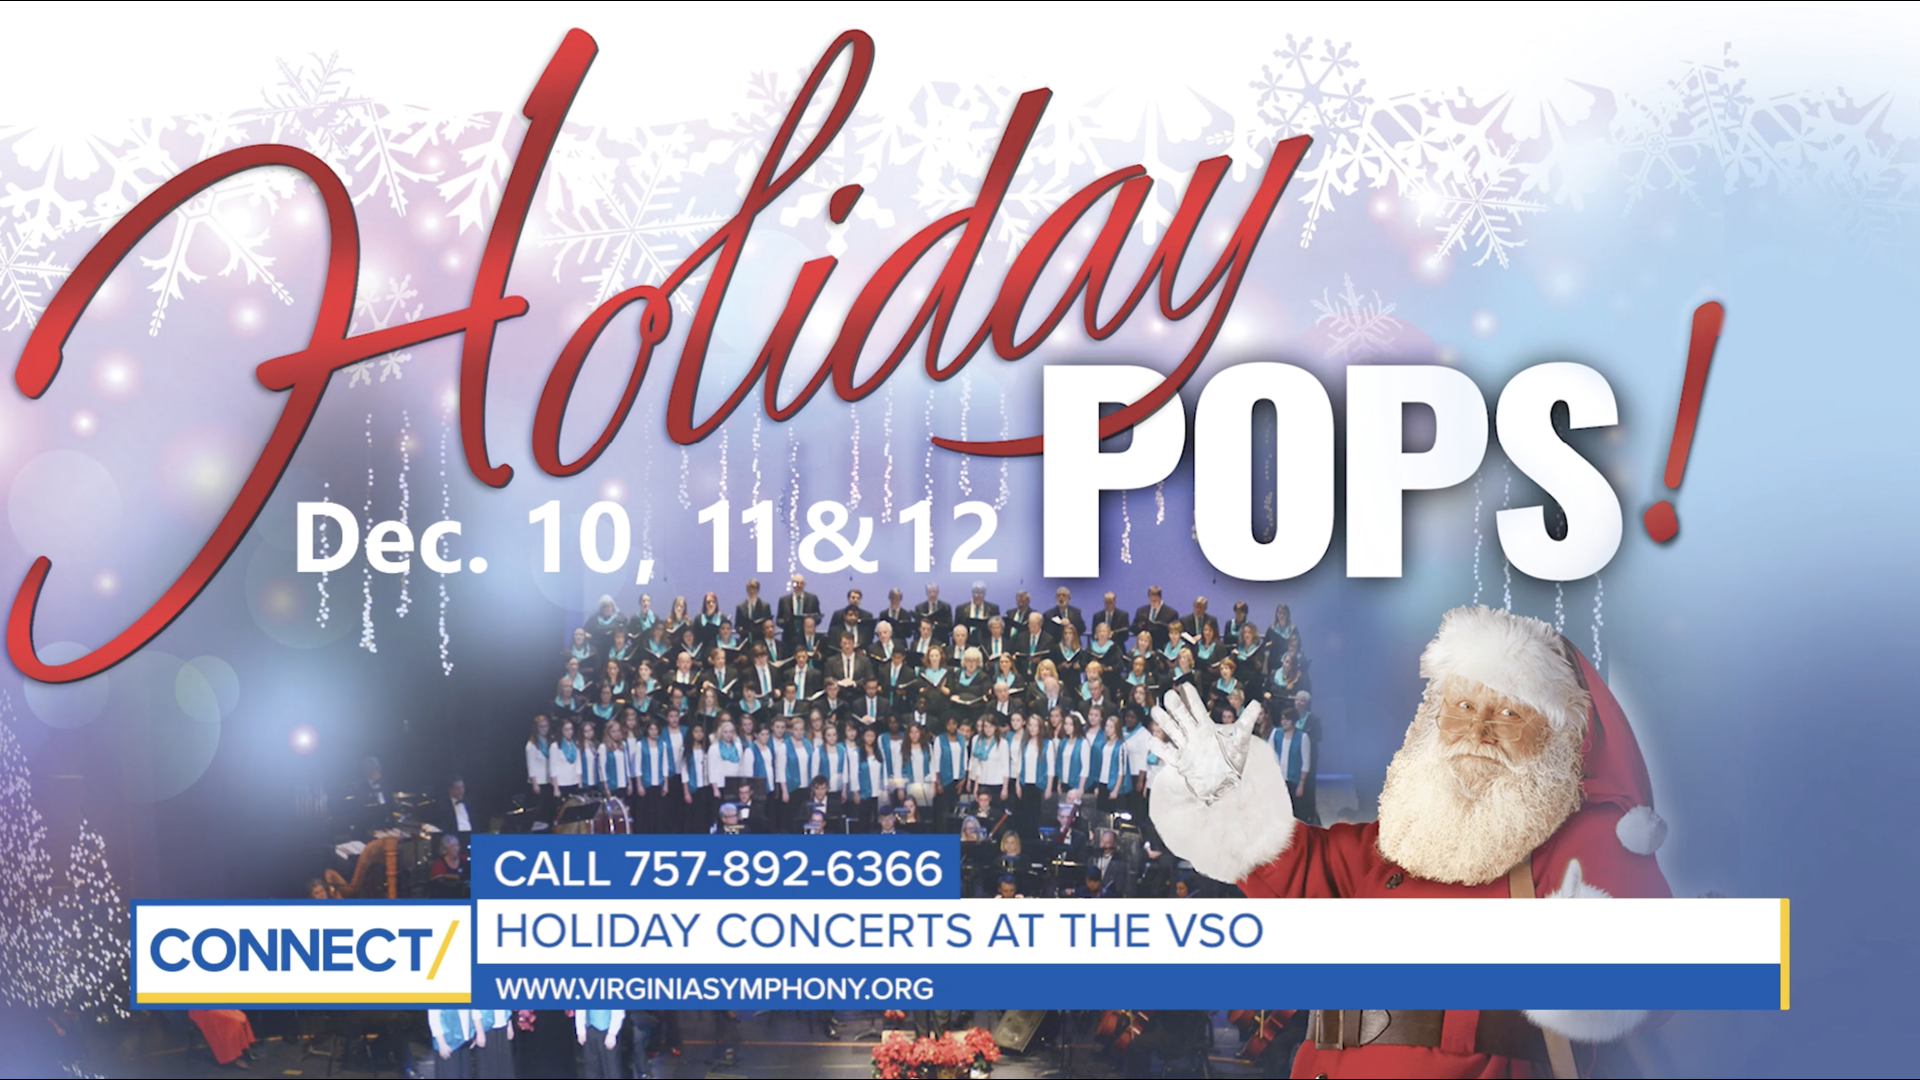 Virginia Symphony Orchestra's holiday lineup includes classic carols that will take you down memory lane and remind you of what makes this time of year so special.